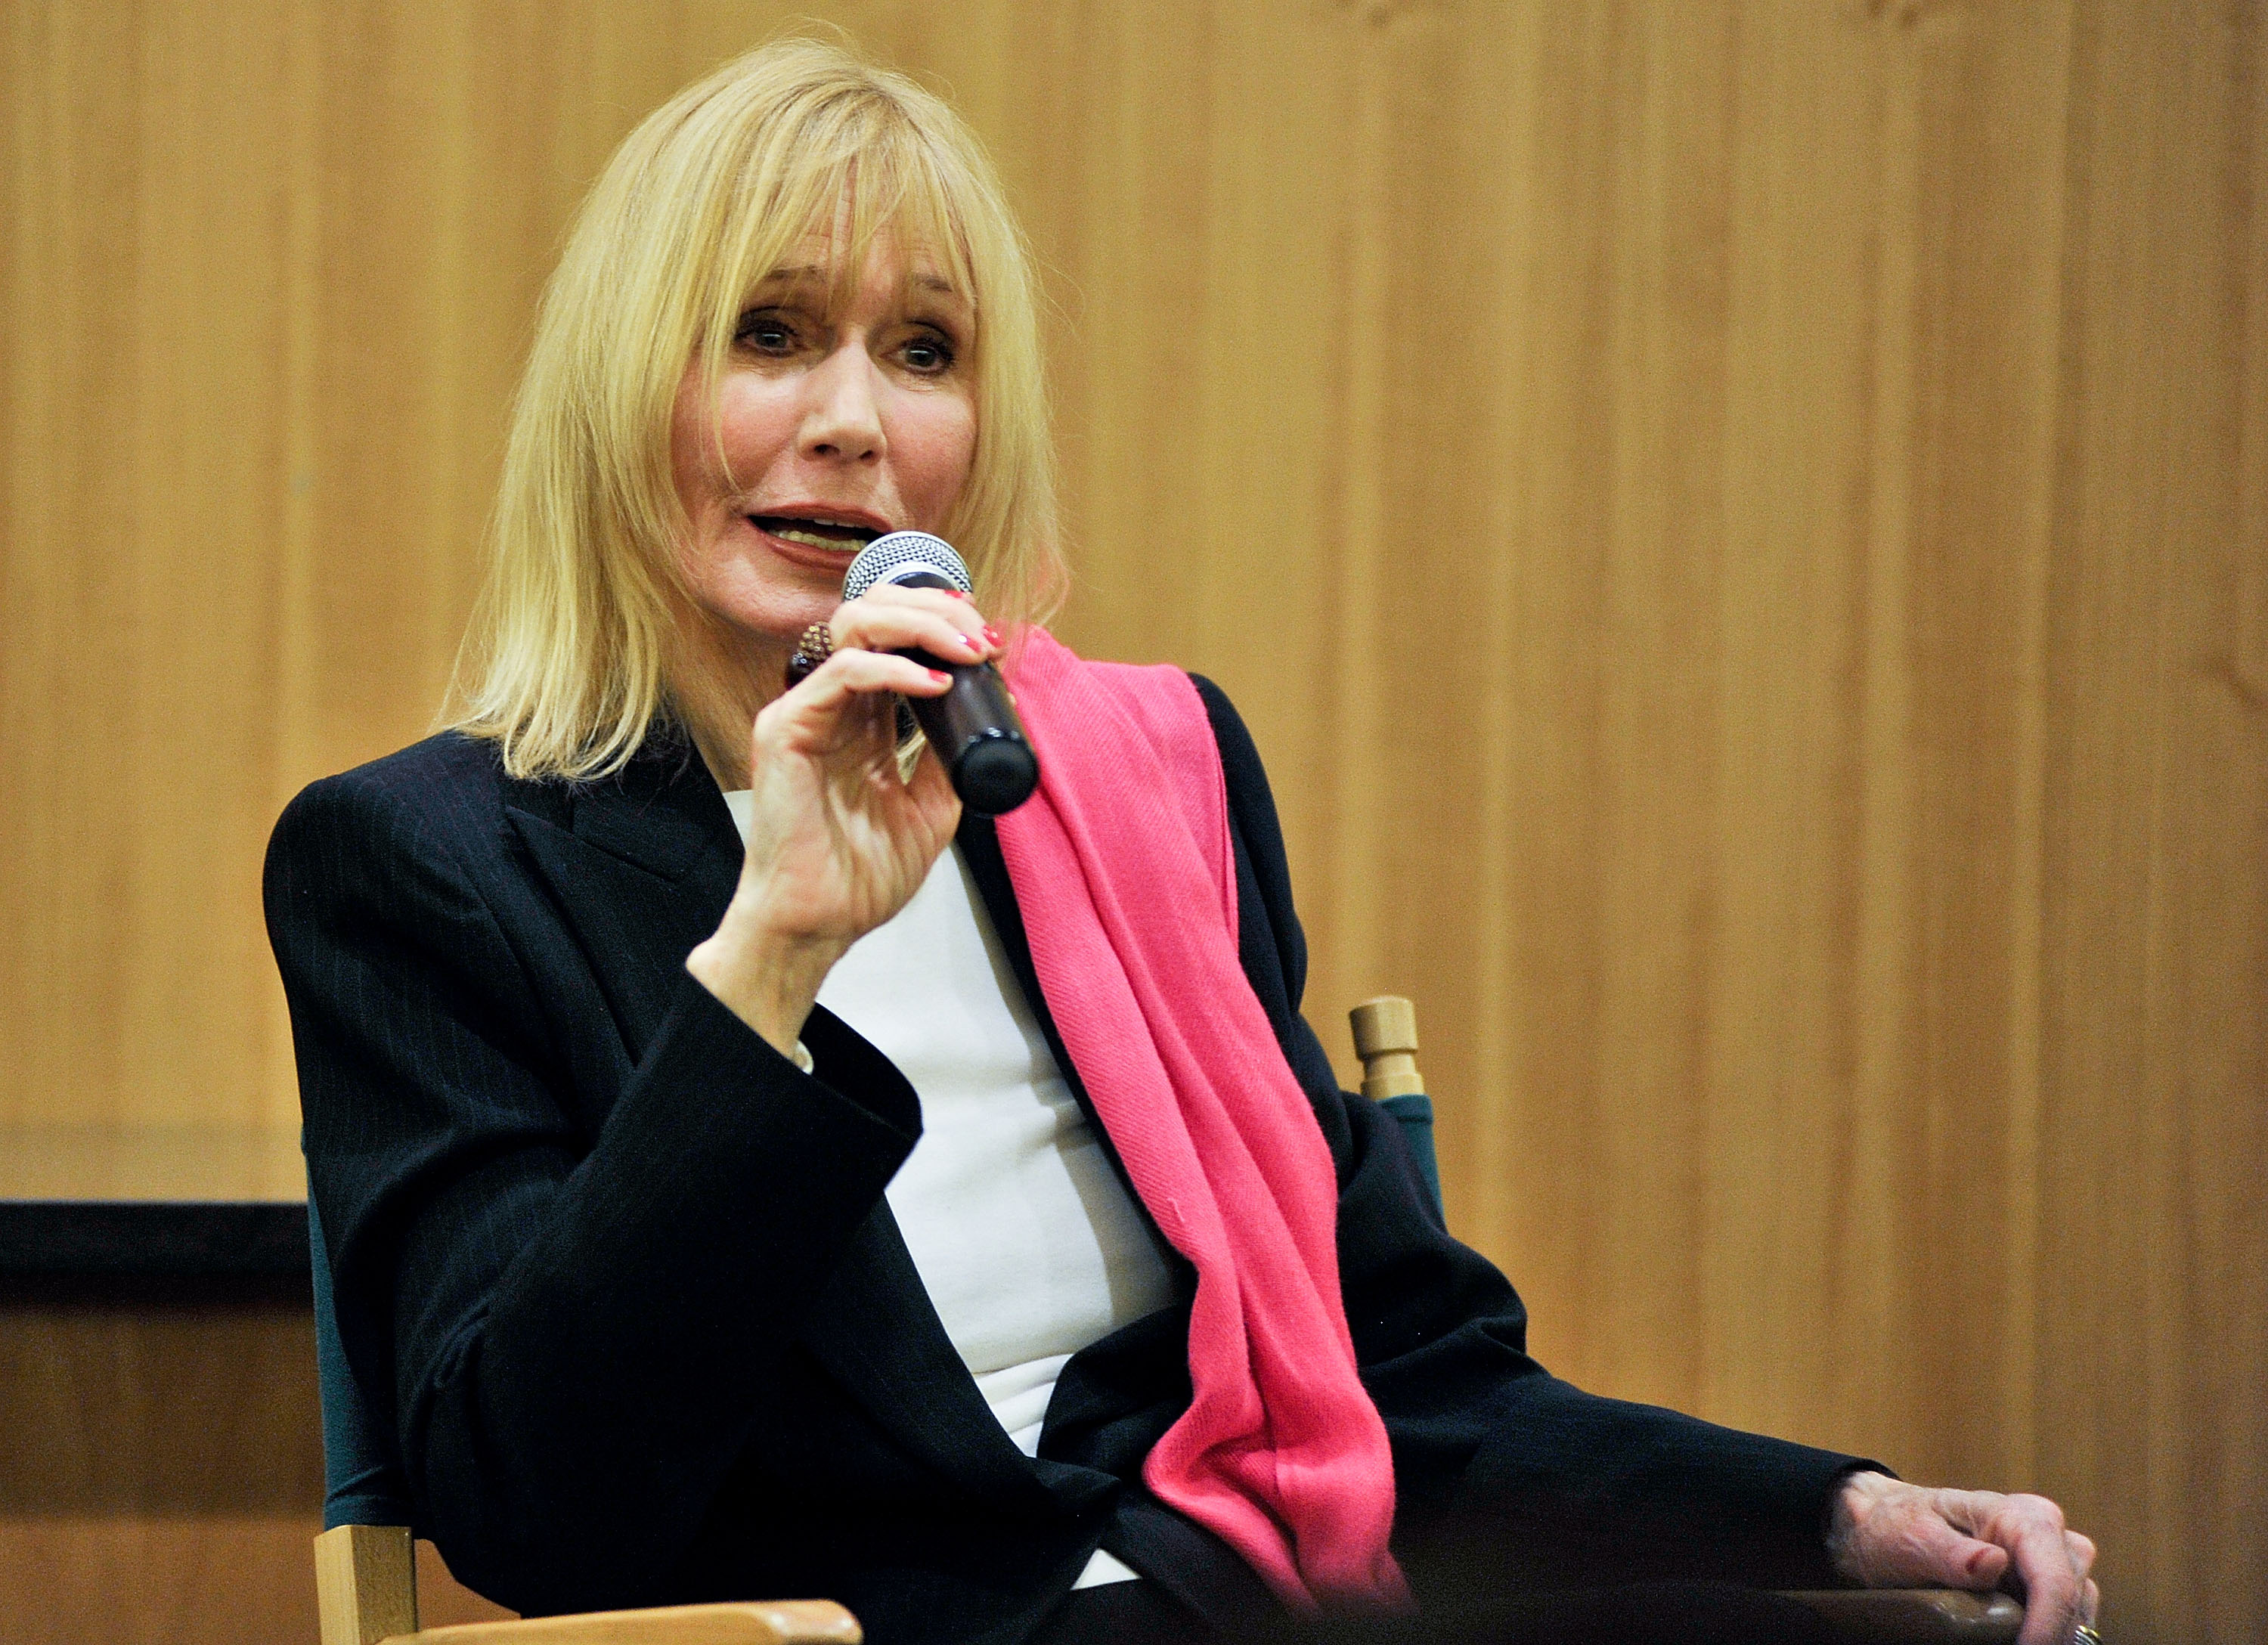 Sally Kellerman promotes "Read My Lips: Stories Of A Hollywood Life" at Barnes & Noble, 86th & Lexington on May 2, 2013 in New York City.